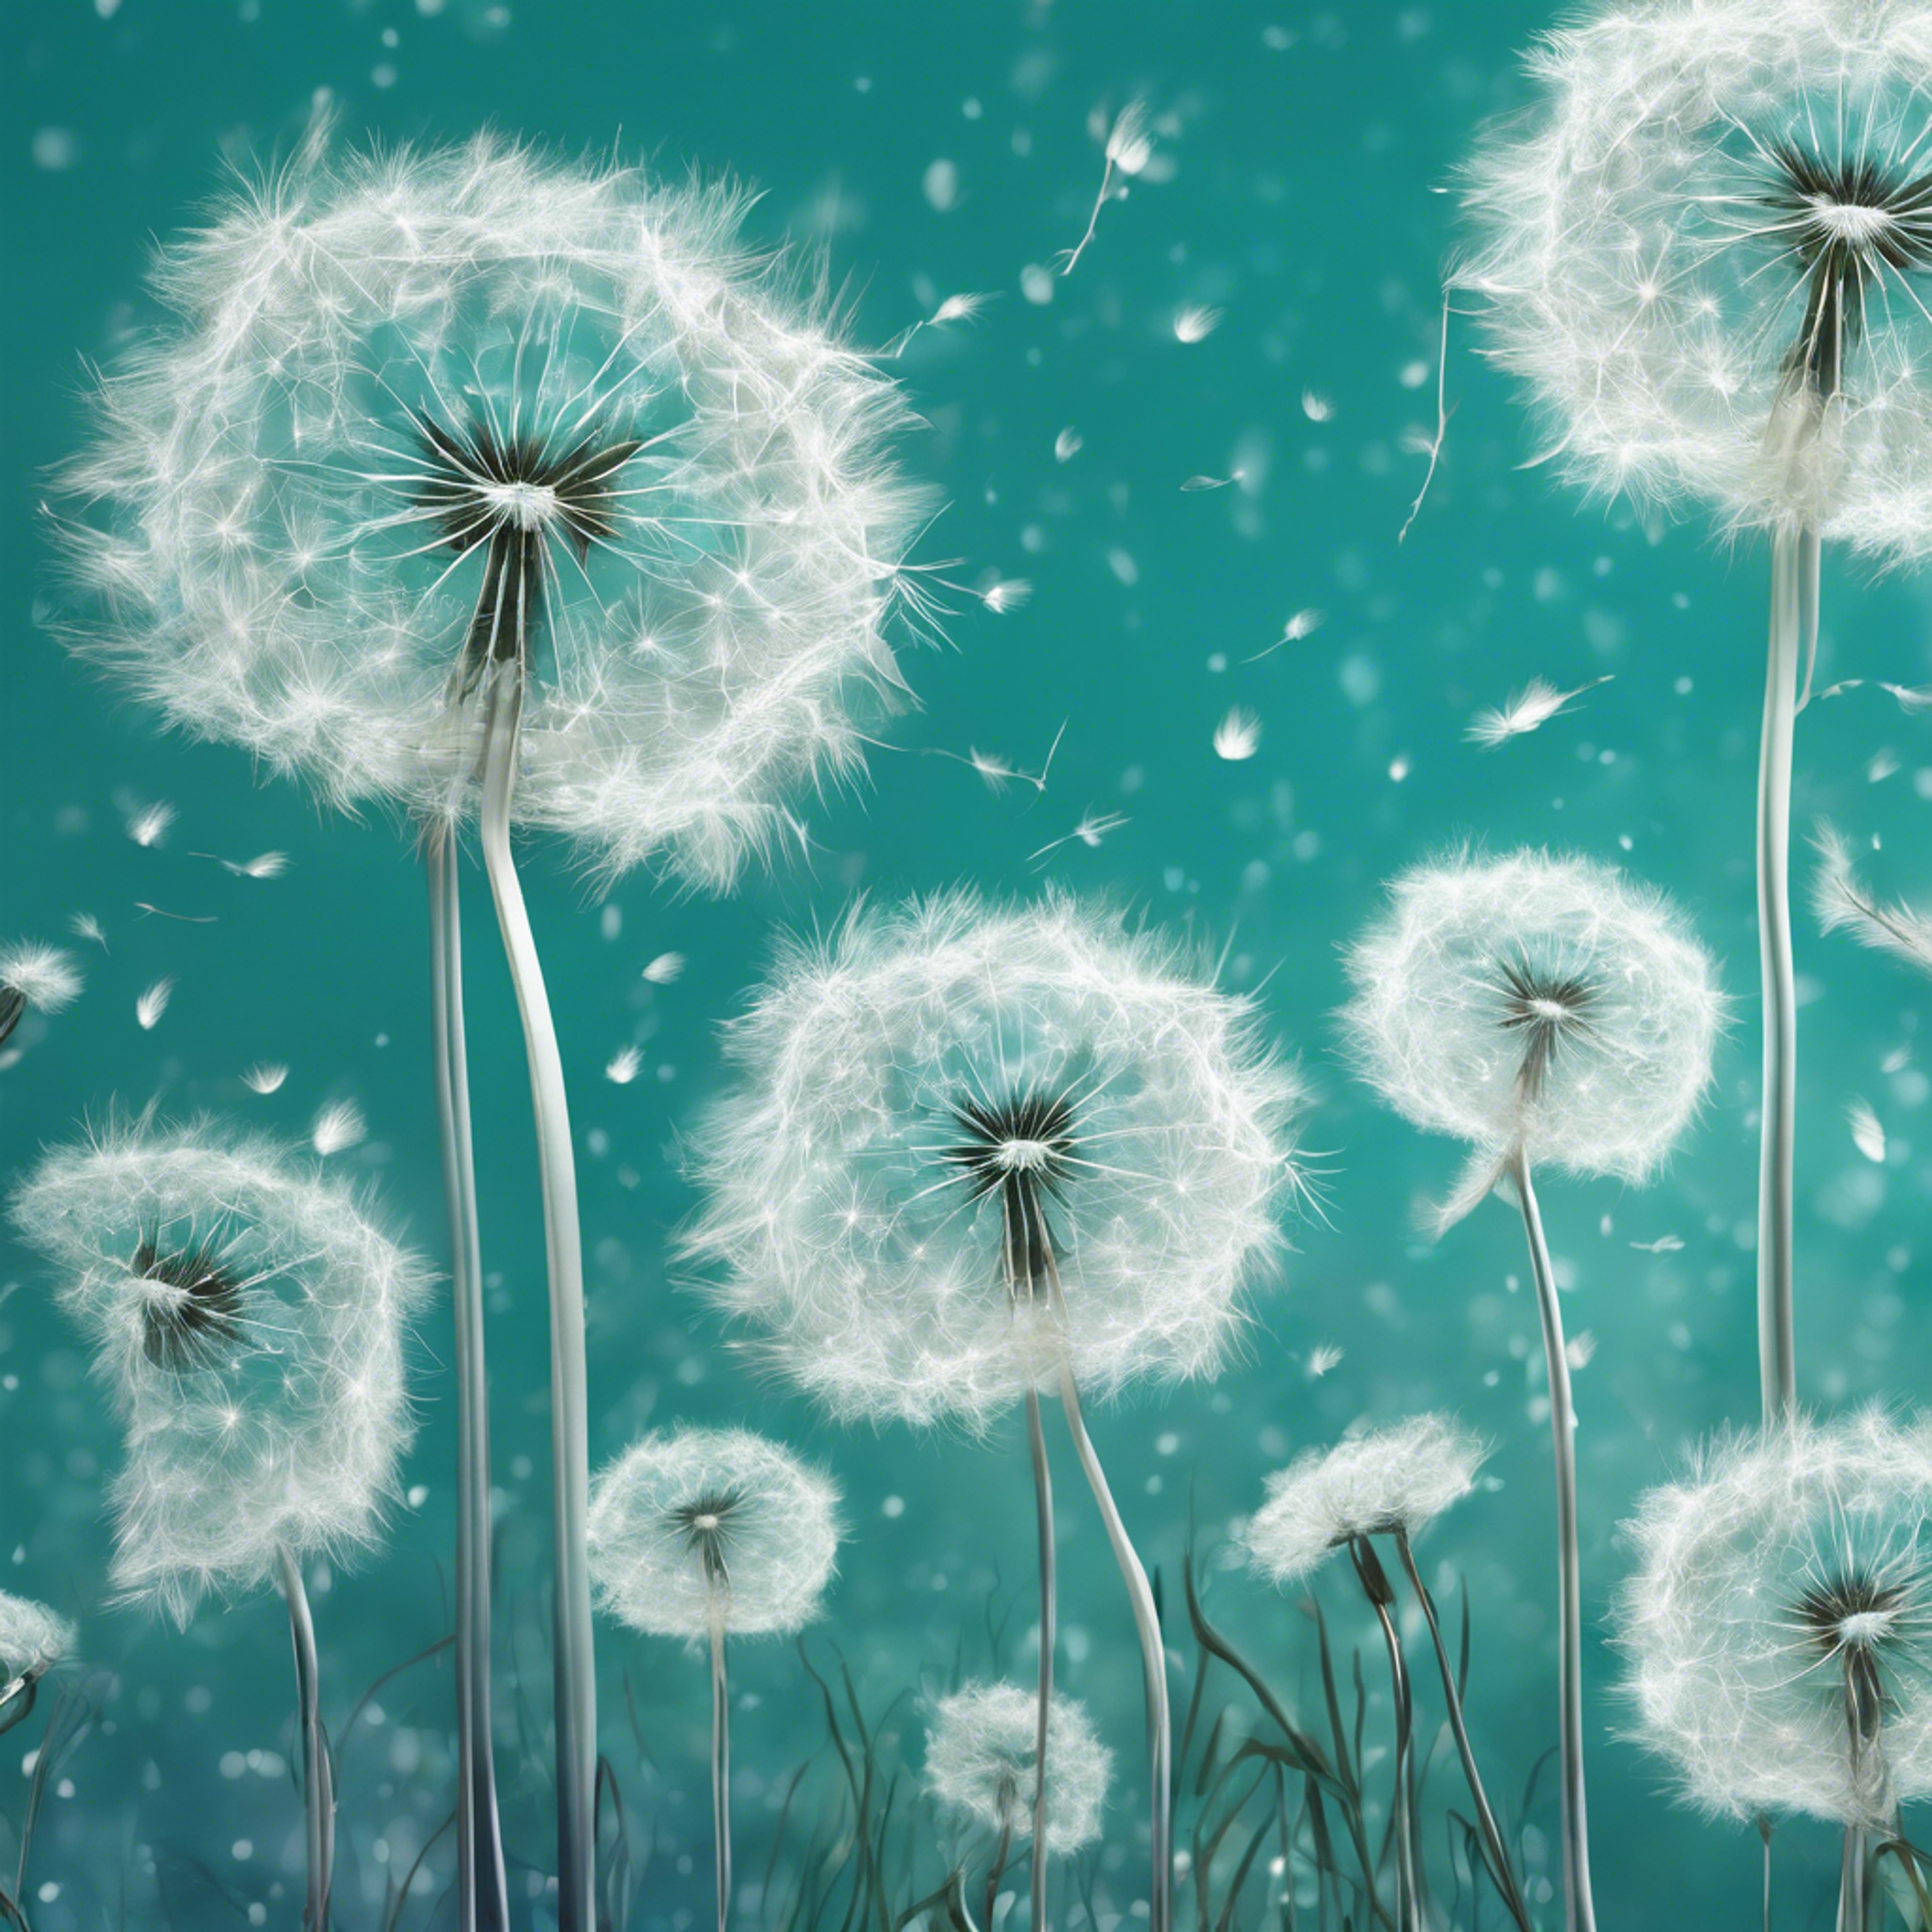 Digitally hand-drawn picture of white dandelions dancing with the breeze against a vivid, teal sky.壁紙[167ad6a77aa64b15a2db]